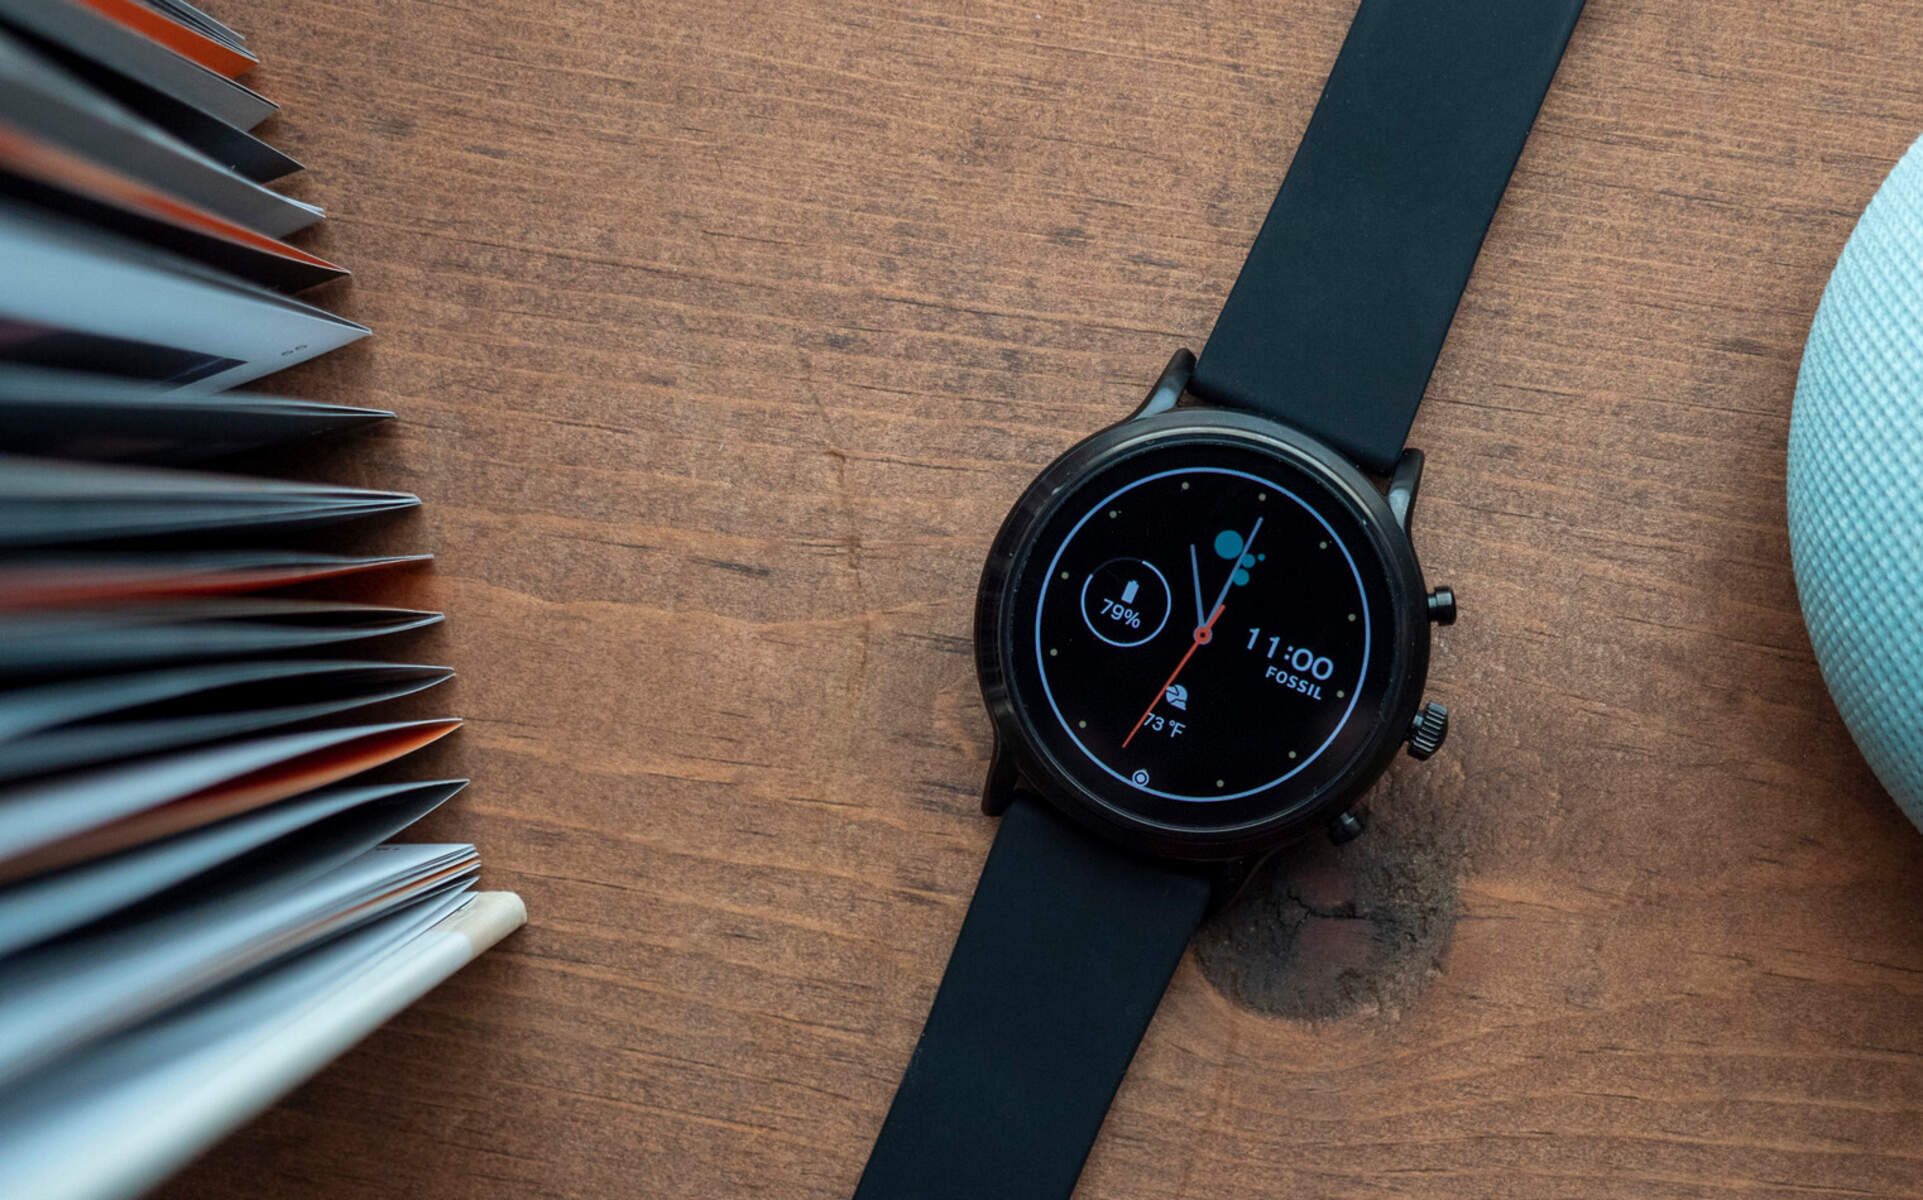 Getting Texts On Fossil Smartwatch: A Quick Guide